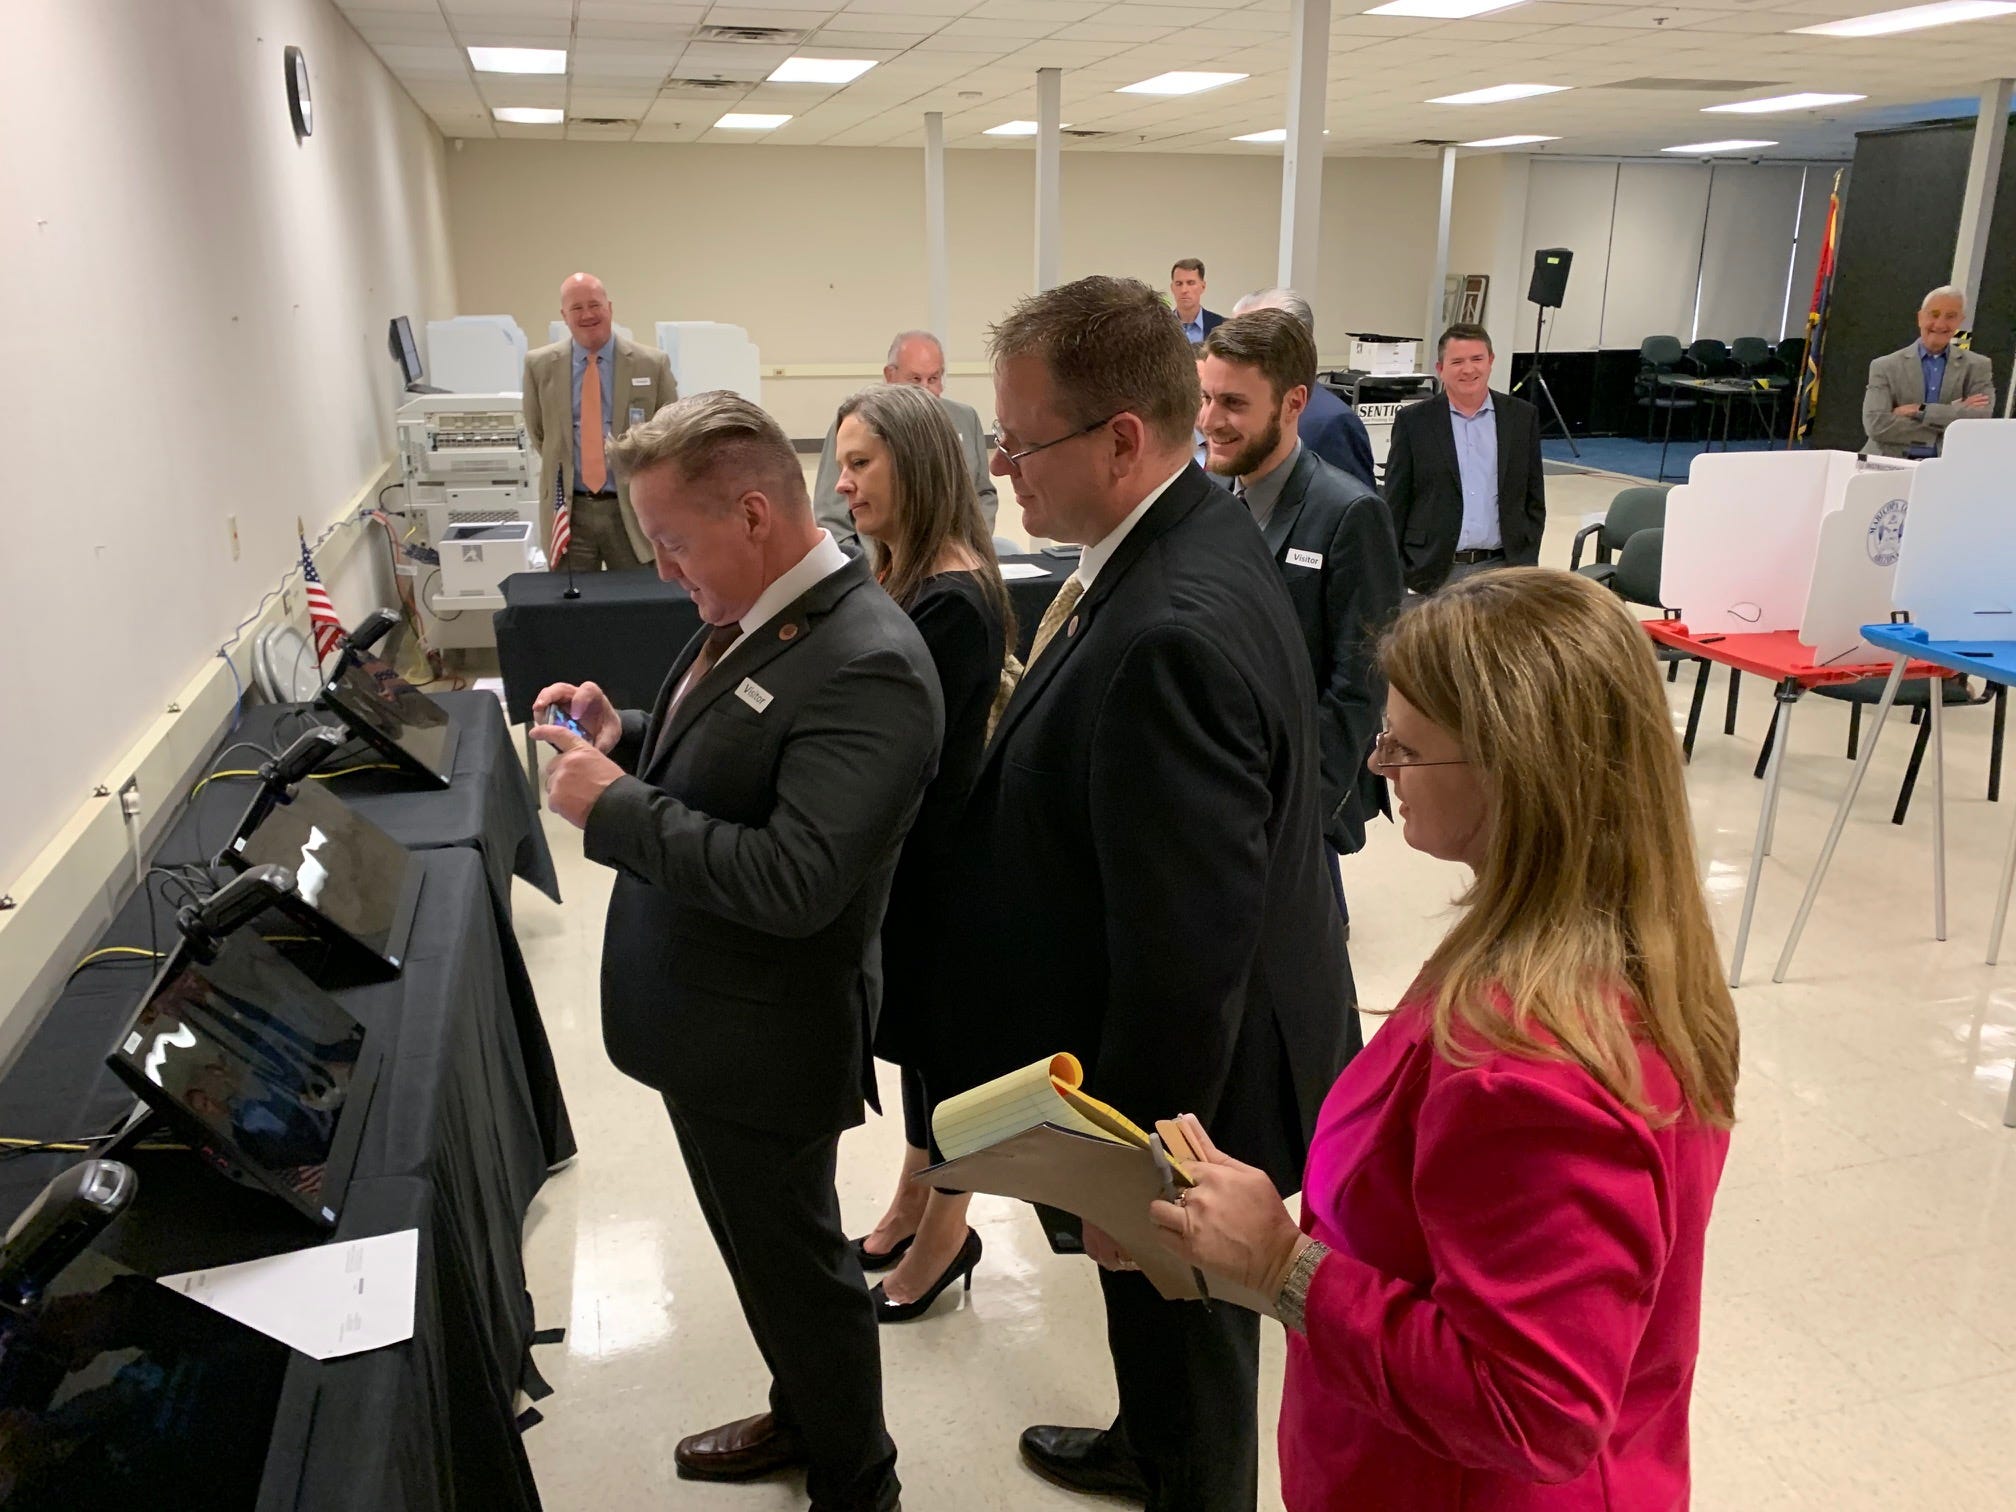 Republican lawmakers are briefed on Dominion Voting Systems equipment at Maricopa County Tabulation and Election Center in Phoenix on Jan. 6, 2020, 10 months before the election.